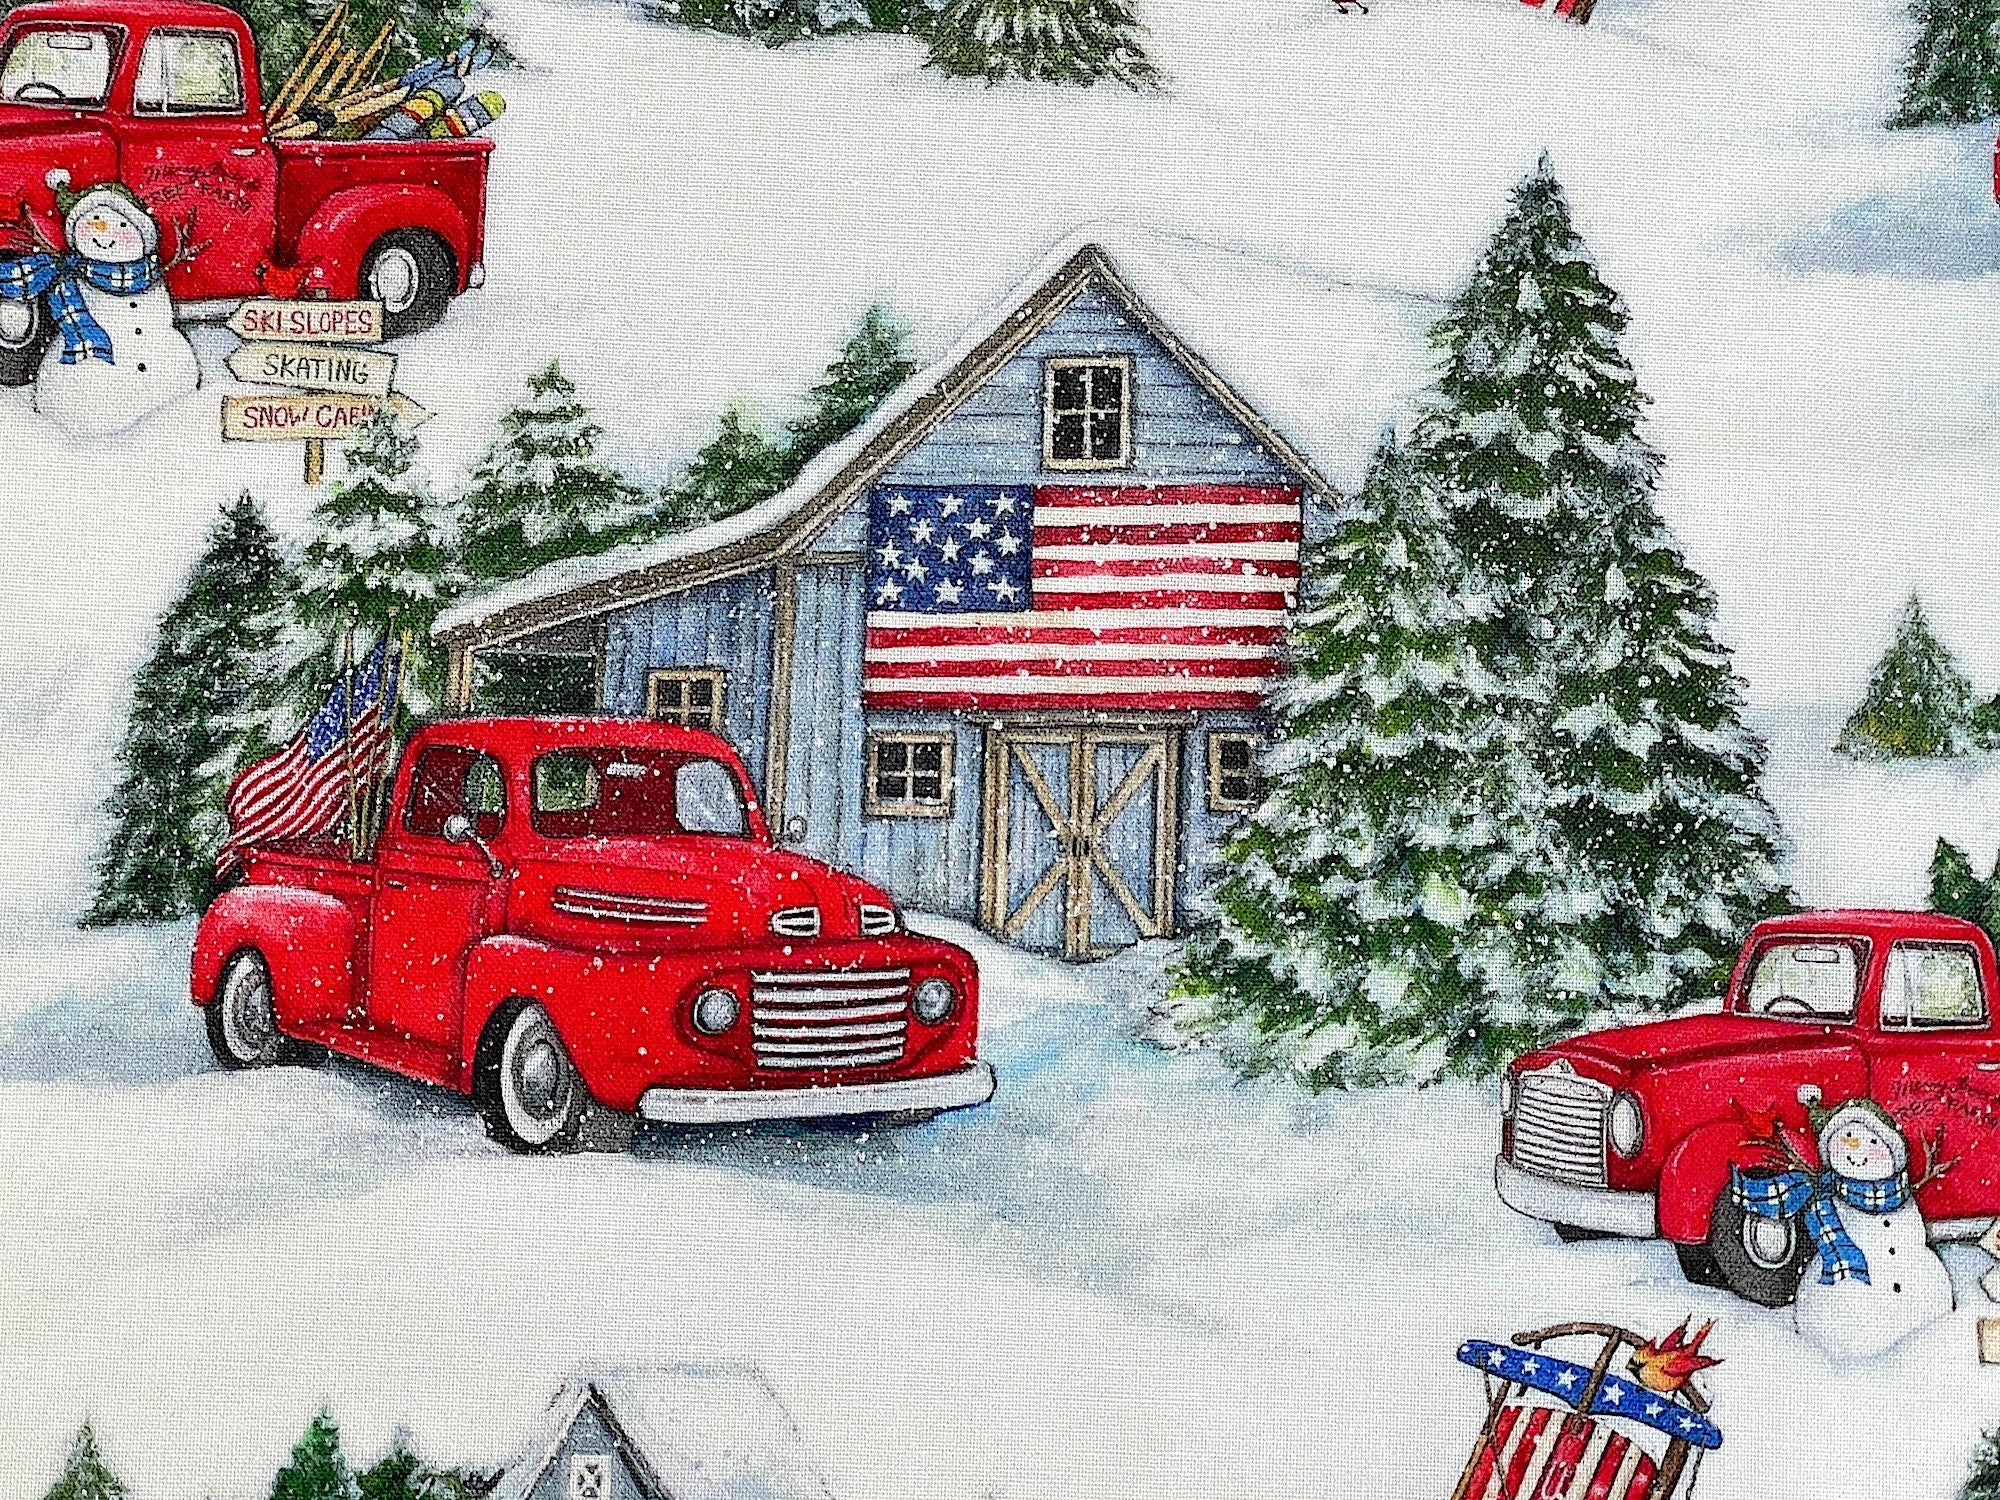 Close up of a red truck in front of a barn that has a USA flag on it.